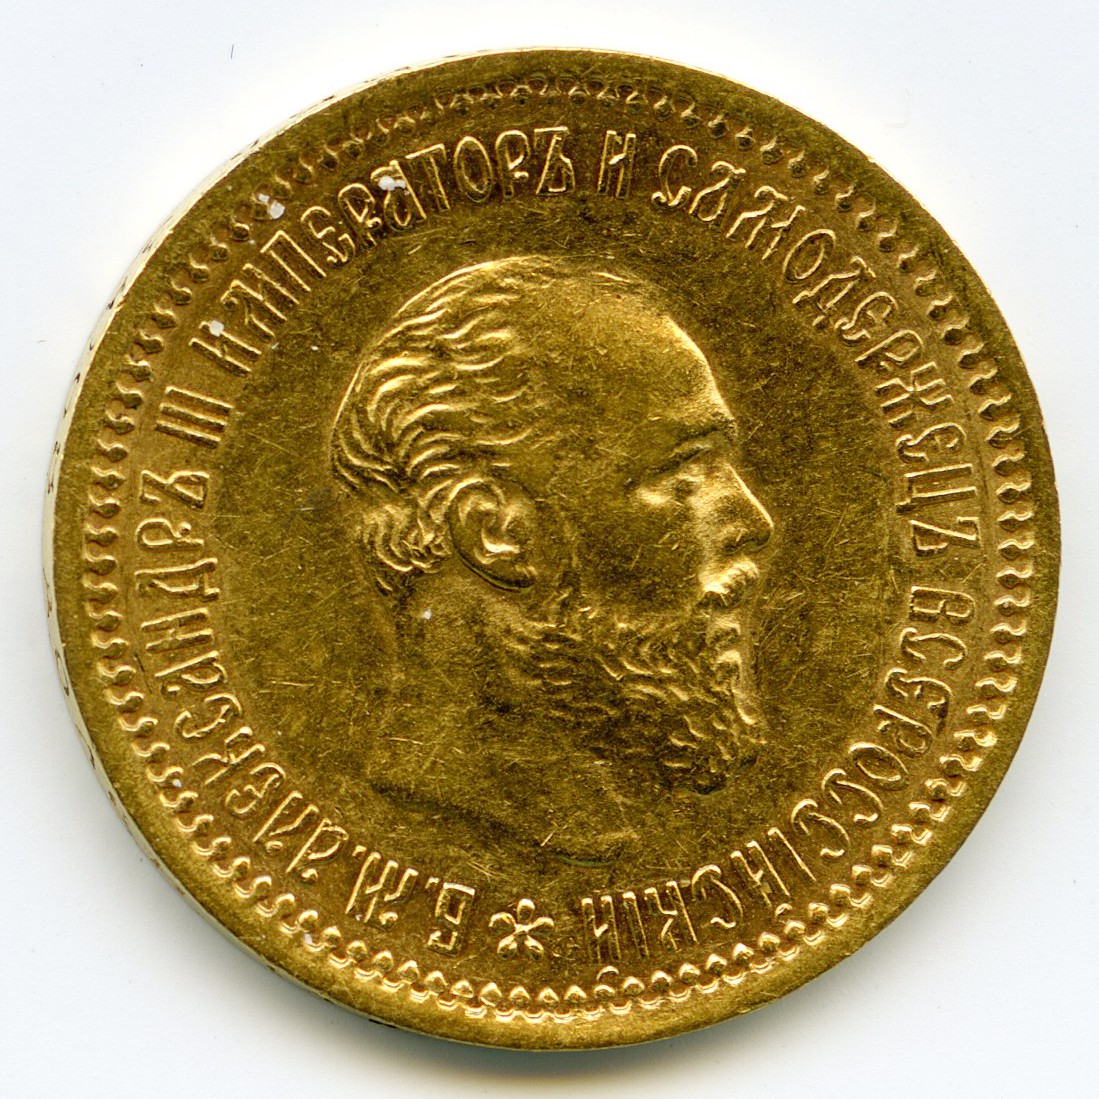 Russie - 5 Roubles - 1890 avers